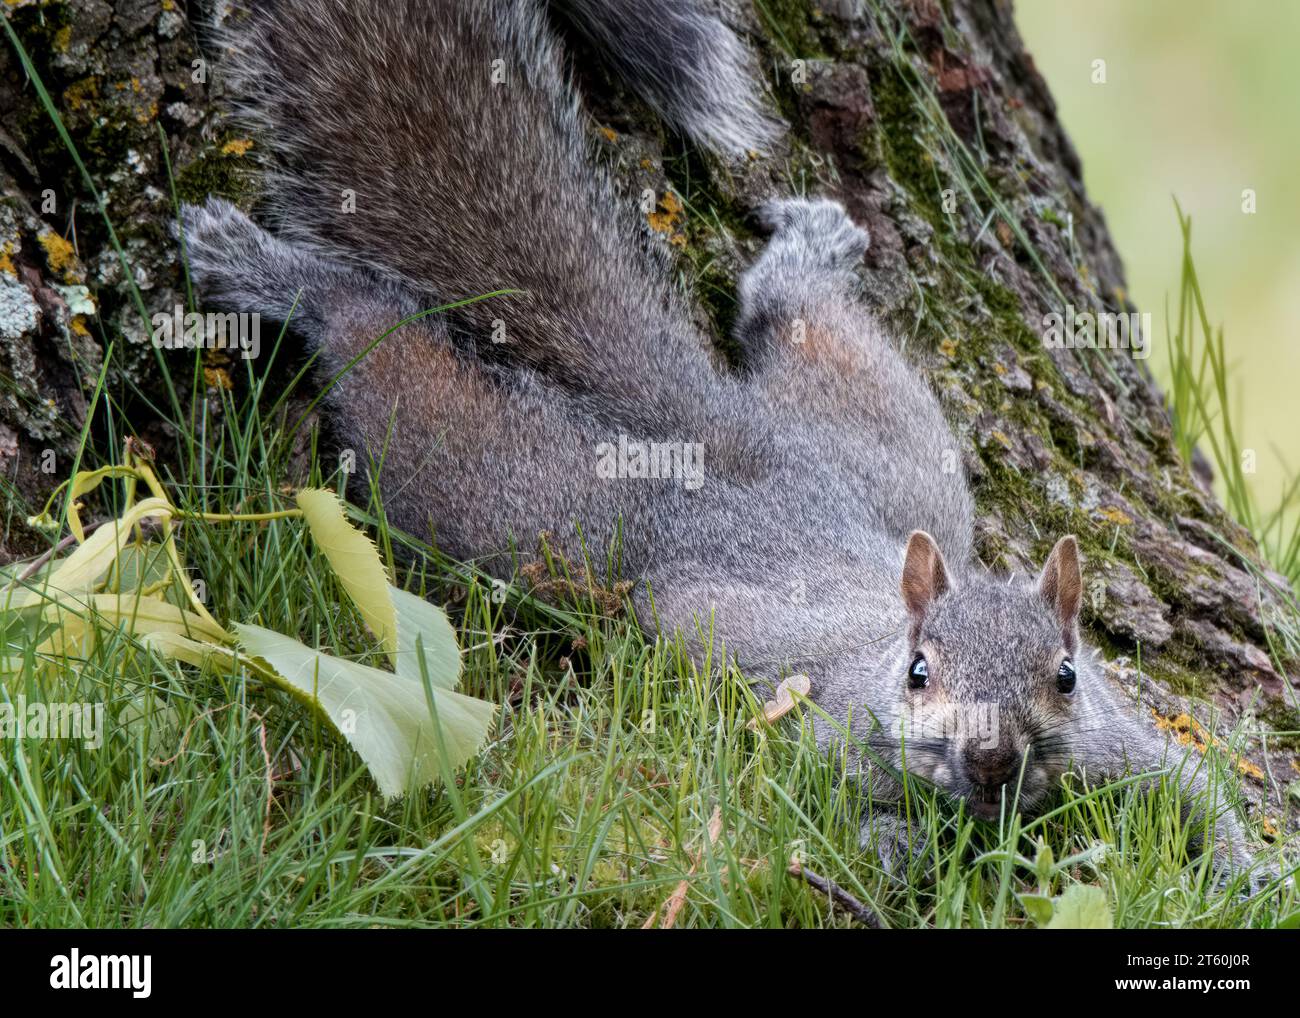 Cute Gray Squirrel (Sciurus carolinensis) spread eagled at base of a Basswood tree in the Chippewa National Forest, northern Minnesota USA Stock Photo